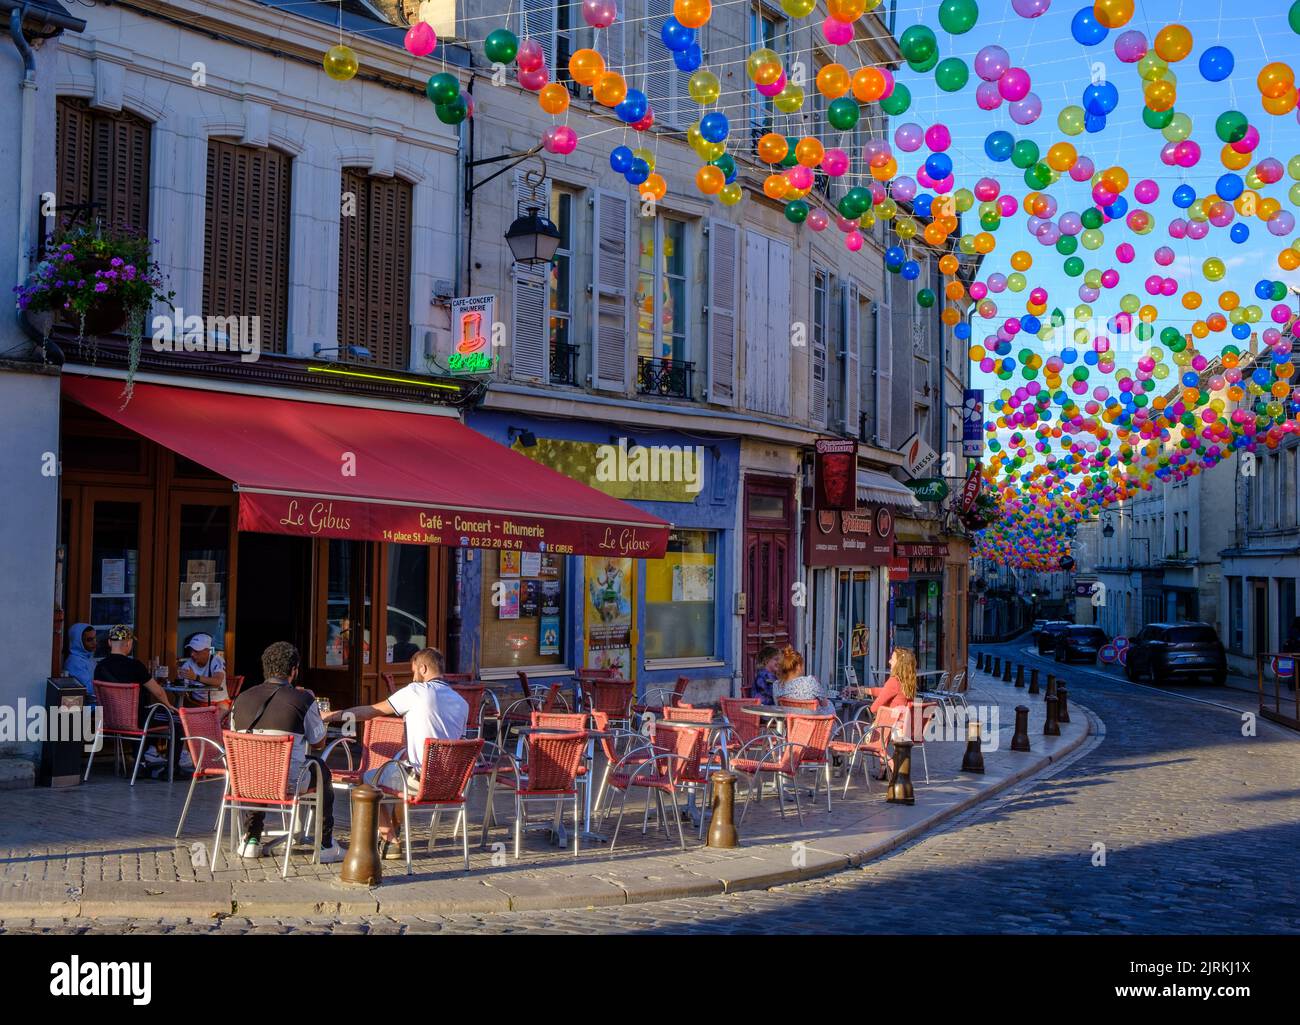 Cafe in French street, balloons suspended over old town of Laon, France Stock Photo